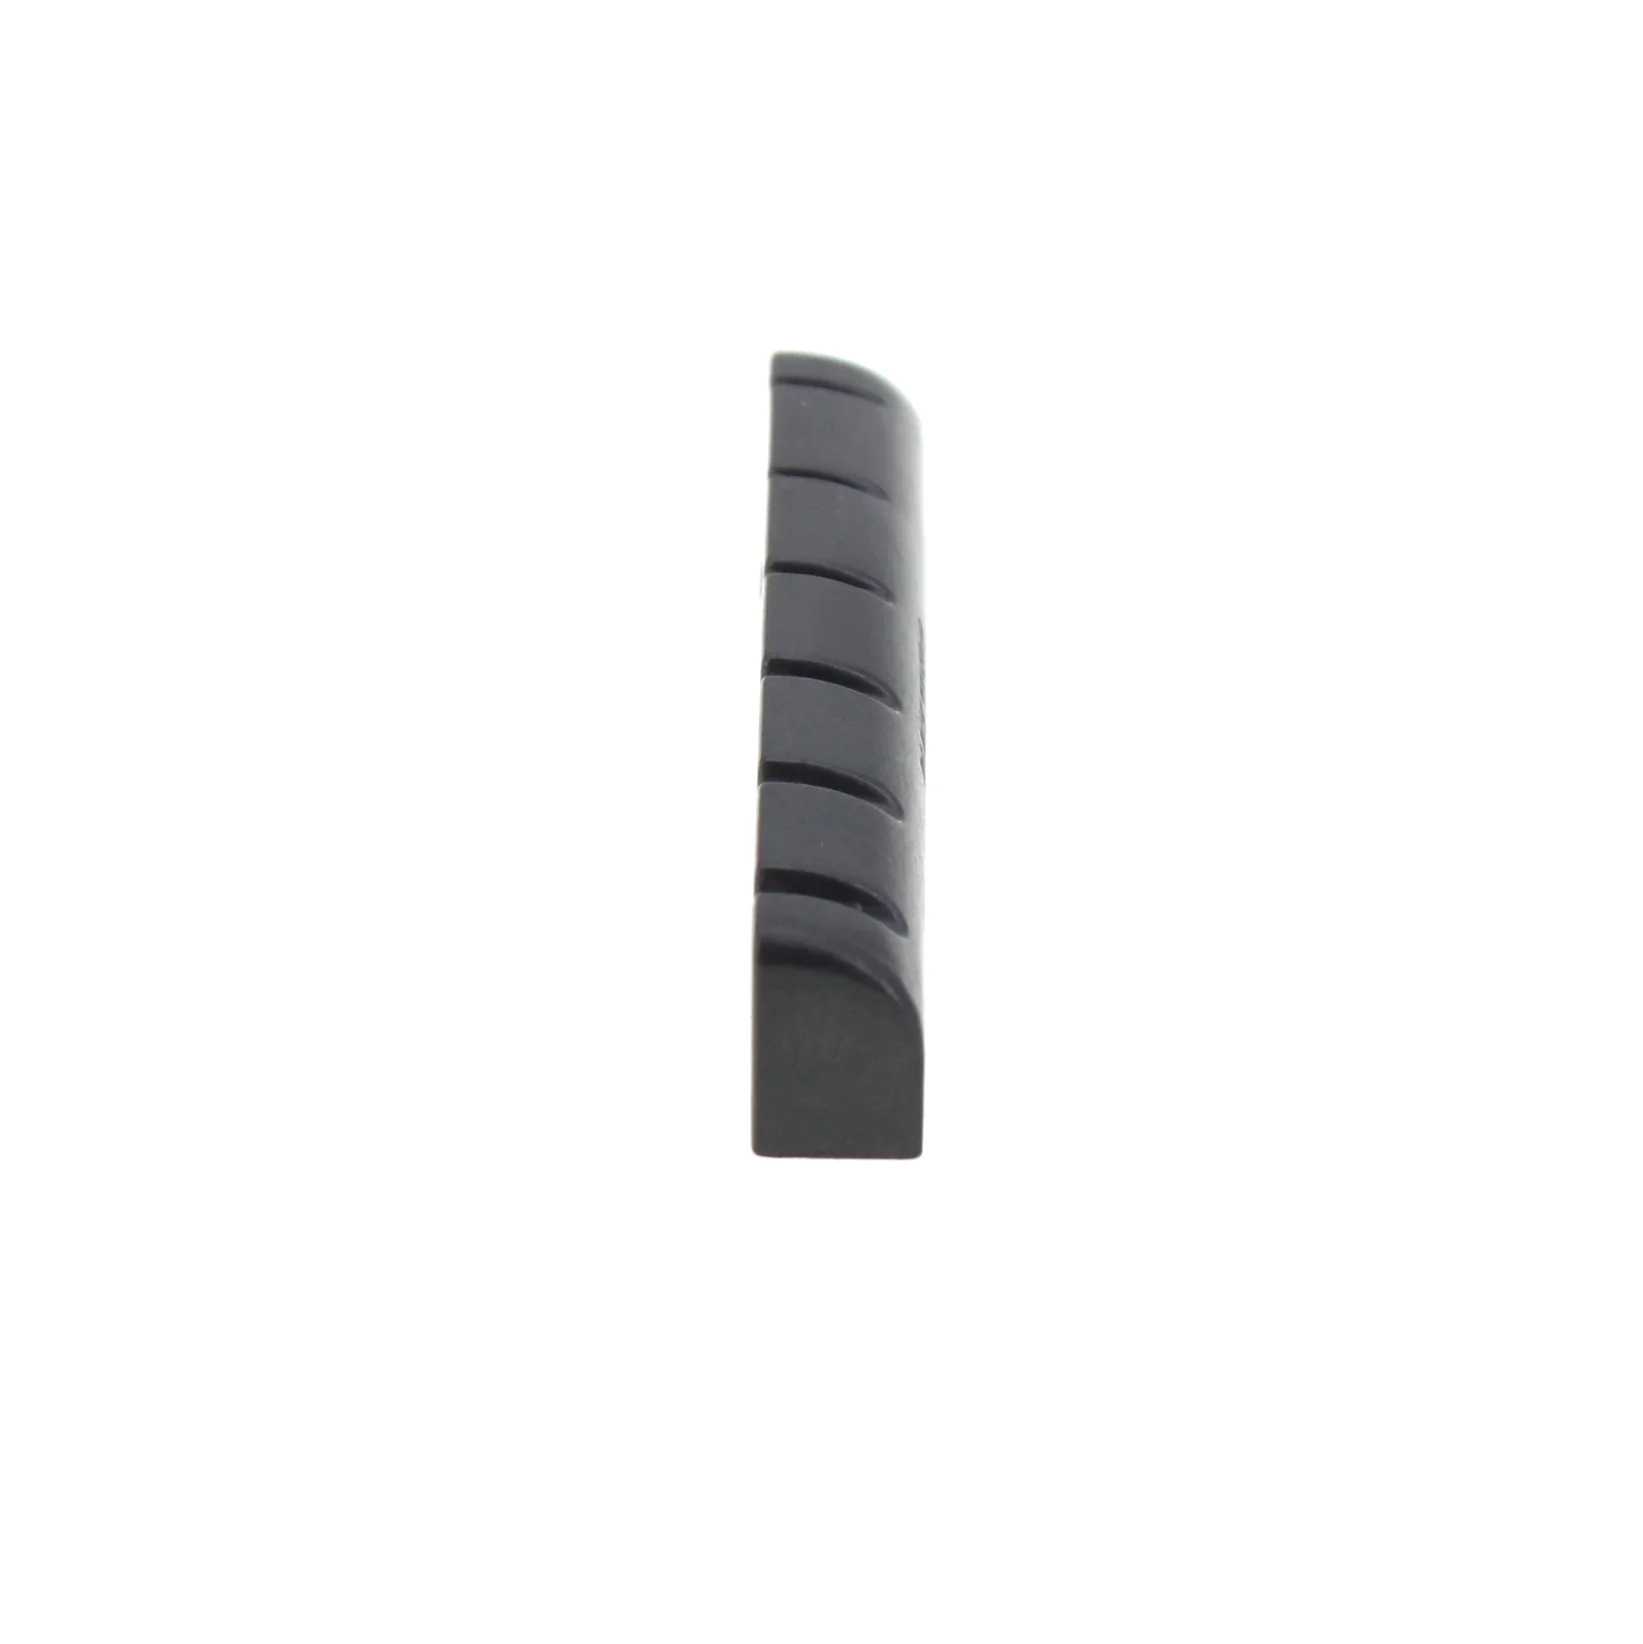 Model 6143-L0 Nut Slotted L43.00mm Lefty (Select Material)